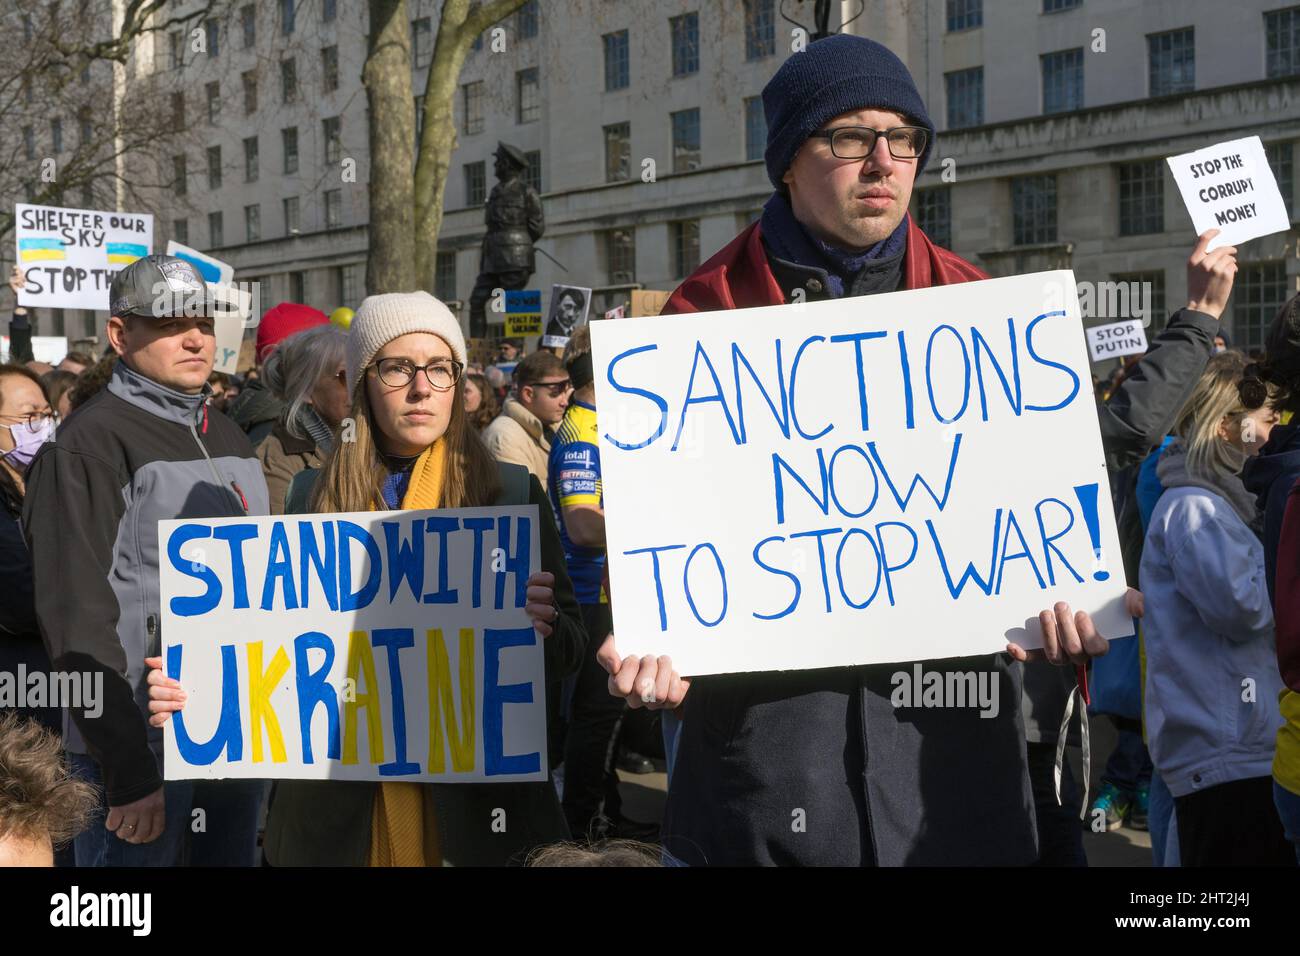 Protest against the Russian invasion of Ukraine outside Downing Street. London - 26th February 2022 Stock Photo